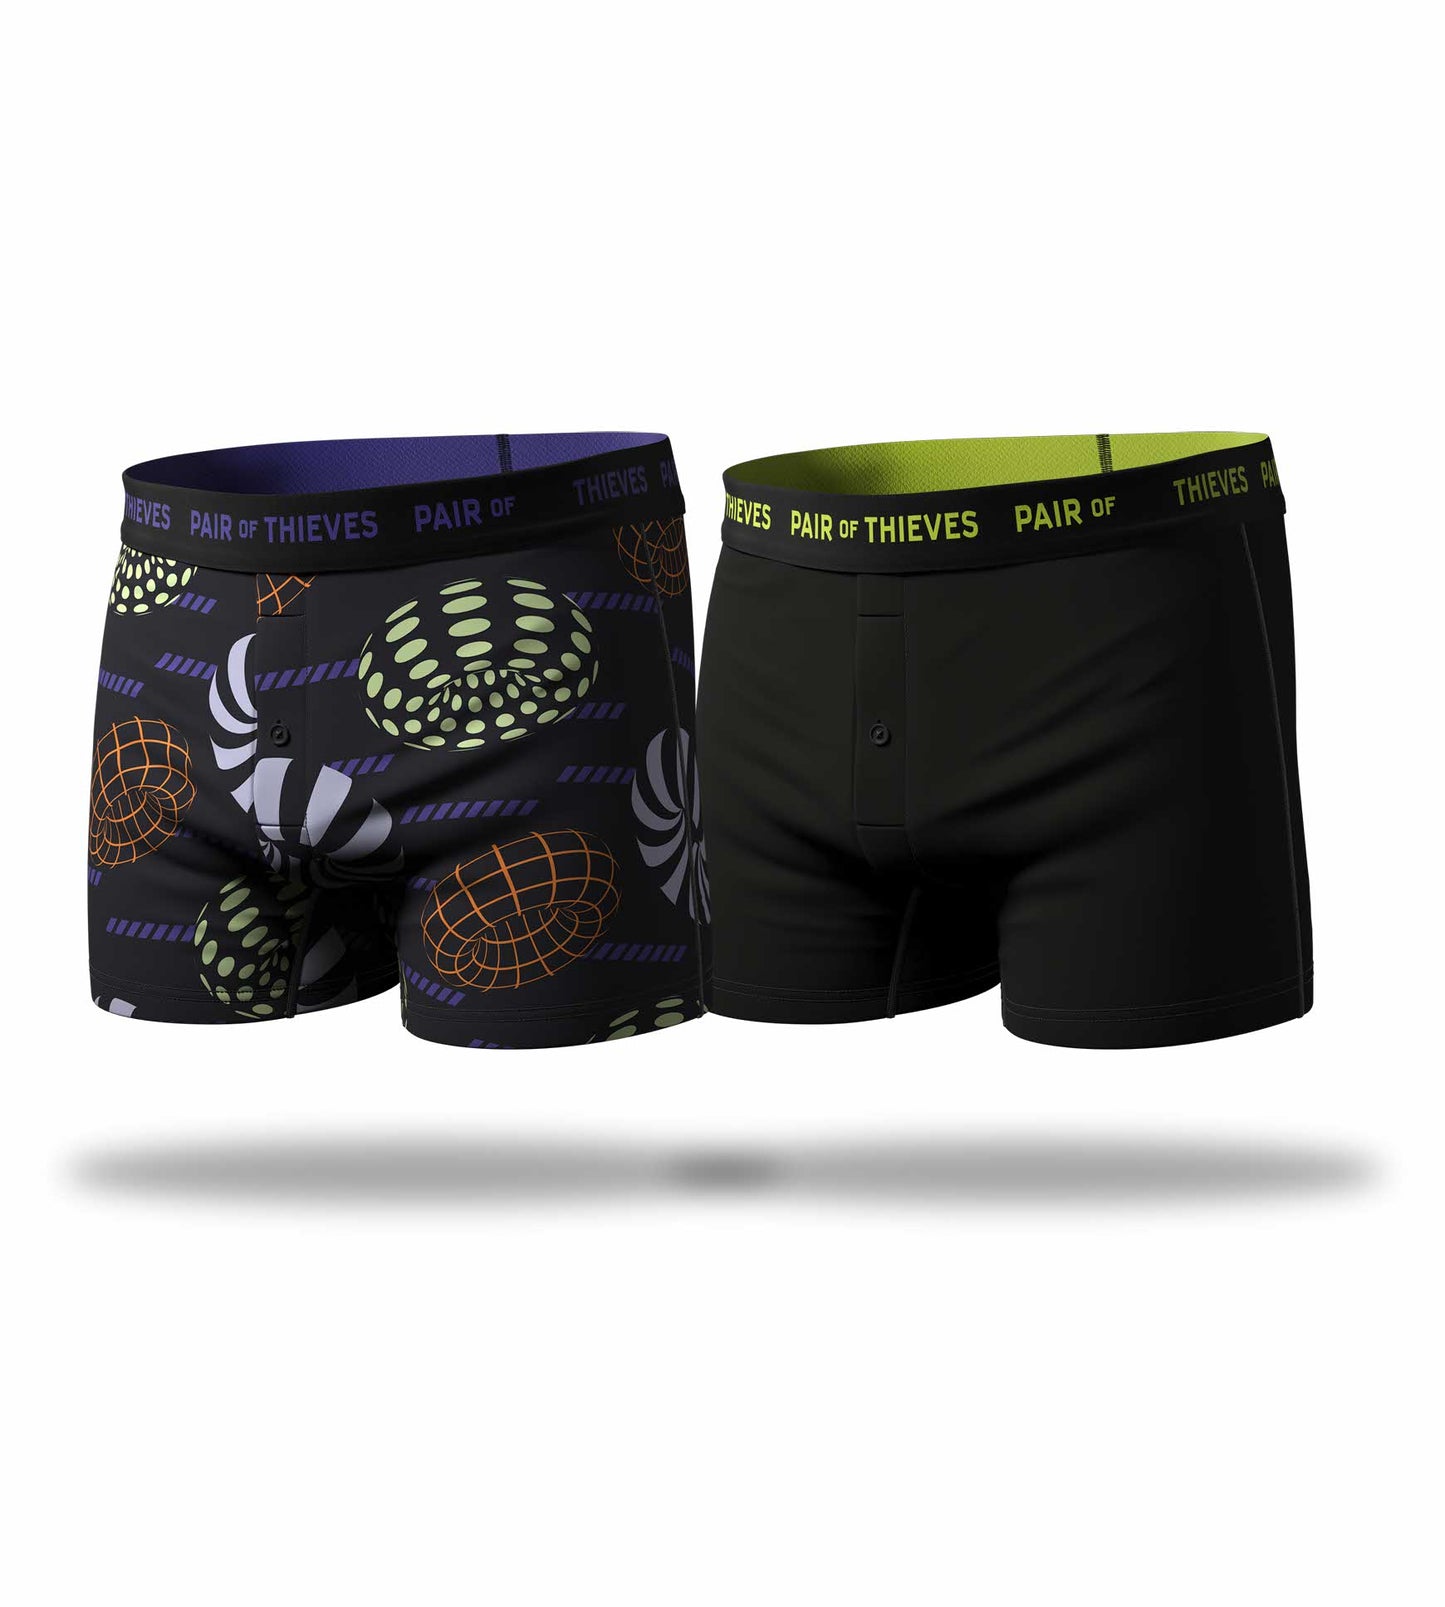 SuperSoft Boxers 2 Pack colors contain: Black, White, Dark Gray, Dark slate blue, Yellowgreen, Gains boro, Black, Dark olive green, Dark slate gray, Silver